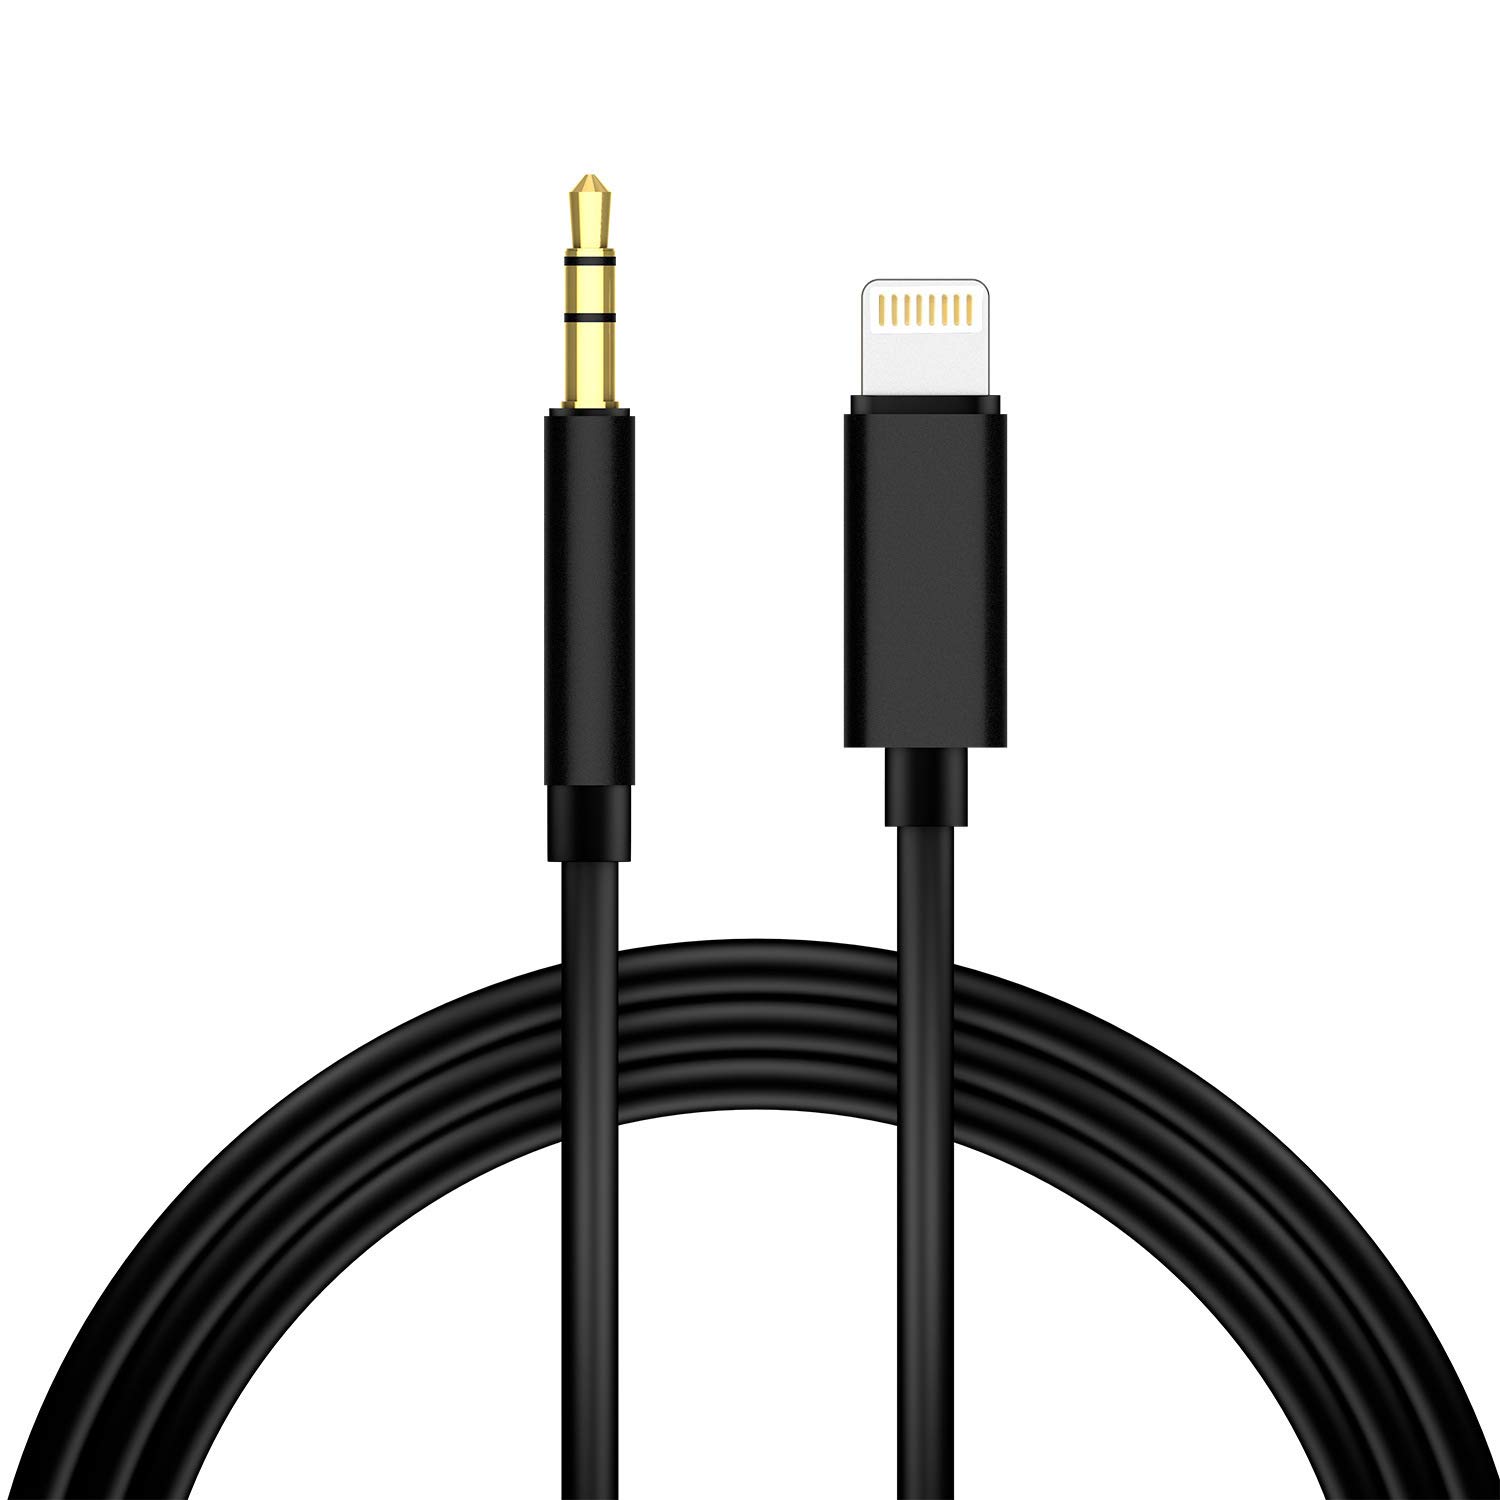 For Apple Interface to 3.5mm Male Aux Cable for iPhone to Aux Cable for Car Headphone Jack Cable for iPhone Xs XR X 8 7 Plus  iOS11 new system - black